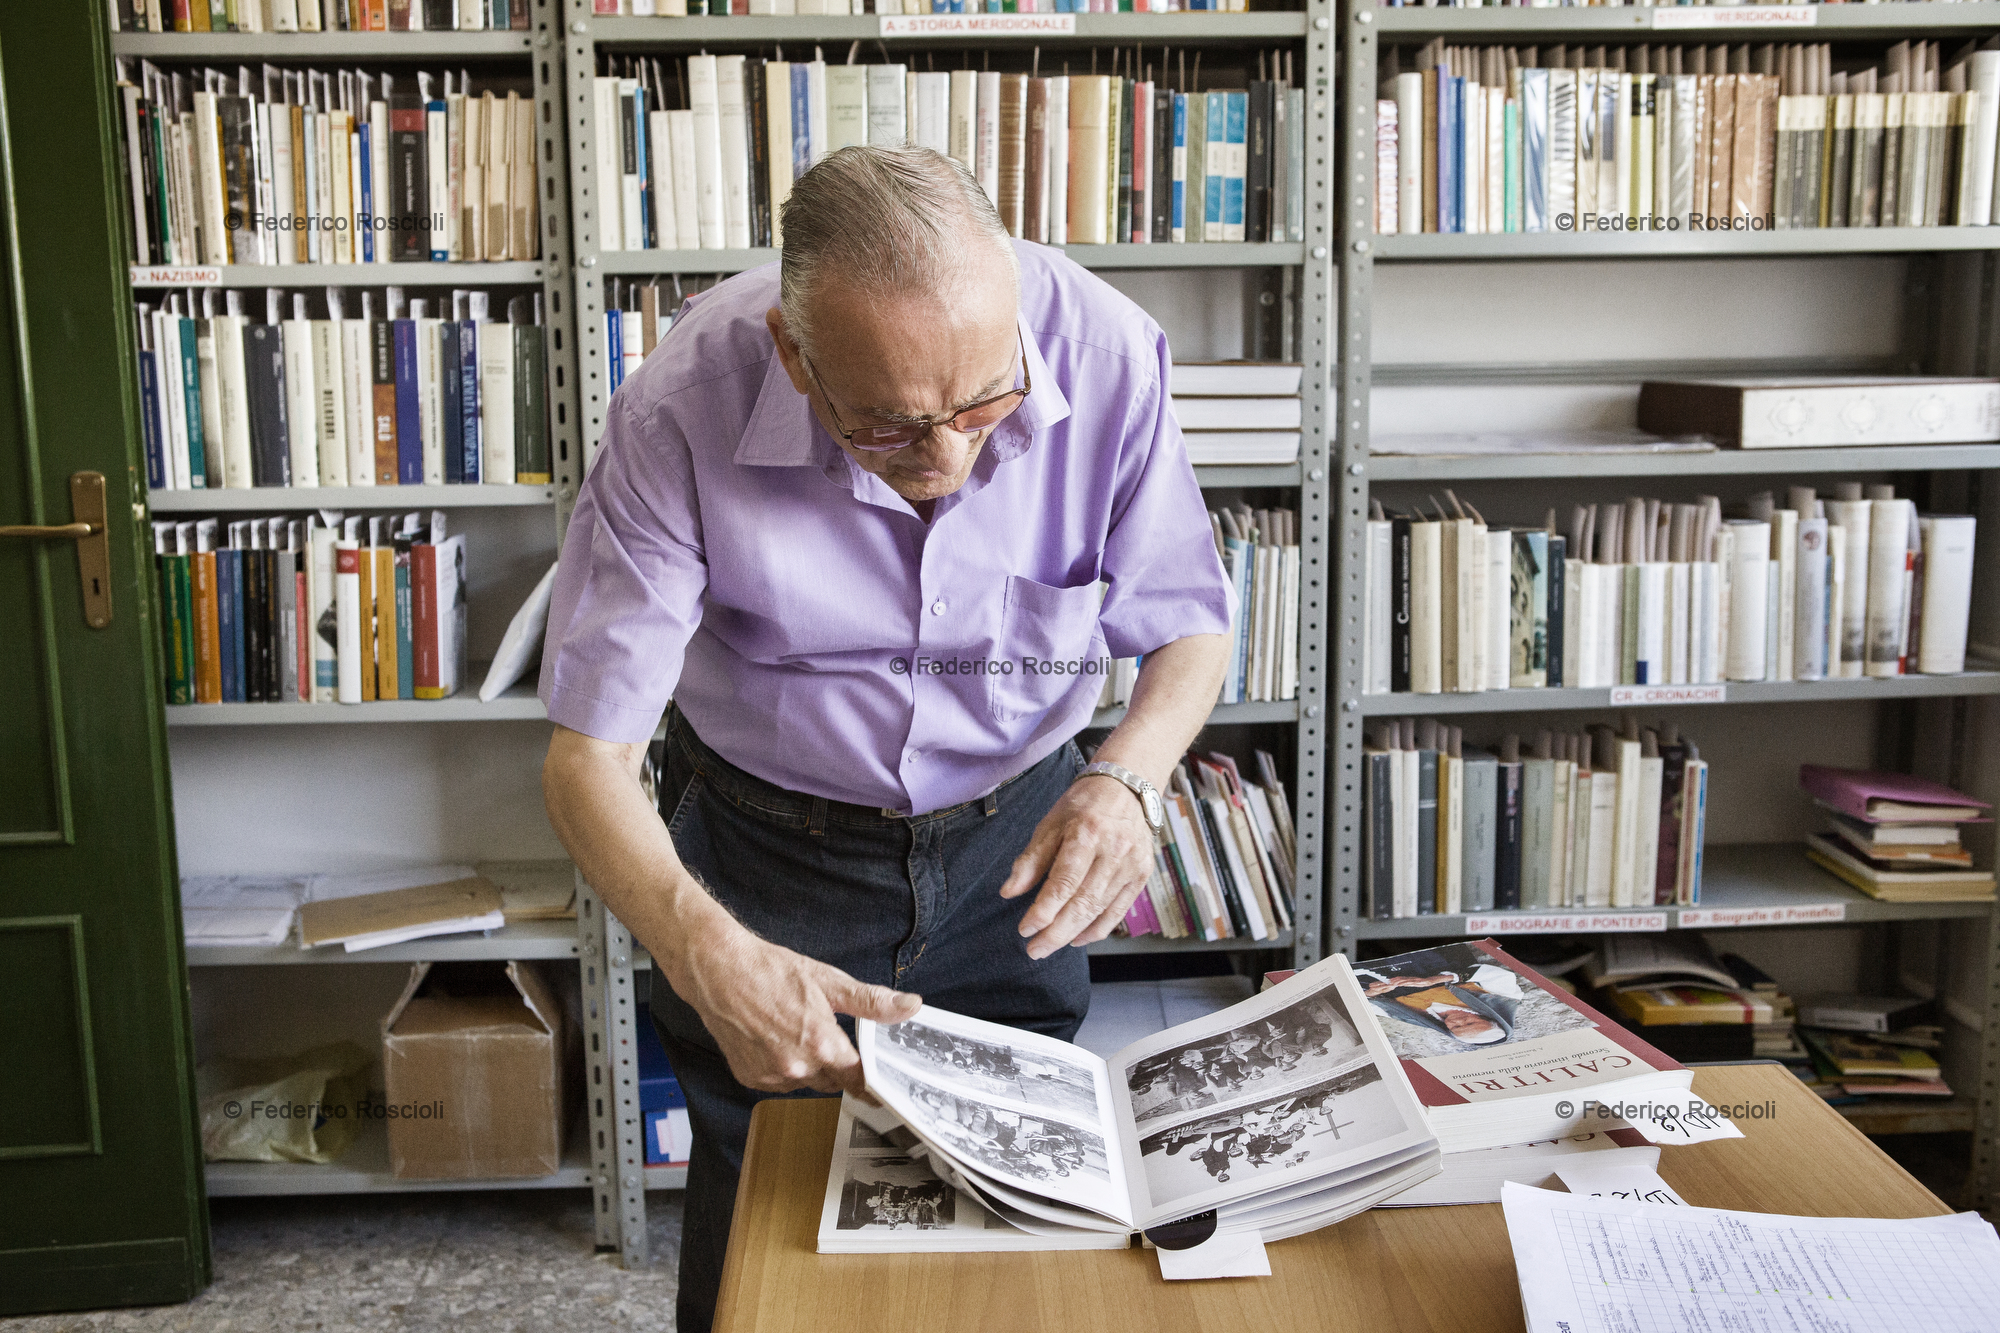 Calitri, Avellino, Italy. August 28, 2013. Raffaele Salvante, creator and director of Il Calitrano, inside Centro Studi Calitrani, a public library that shares more than 8000 titles once belonged to him.